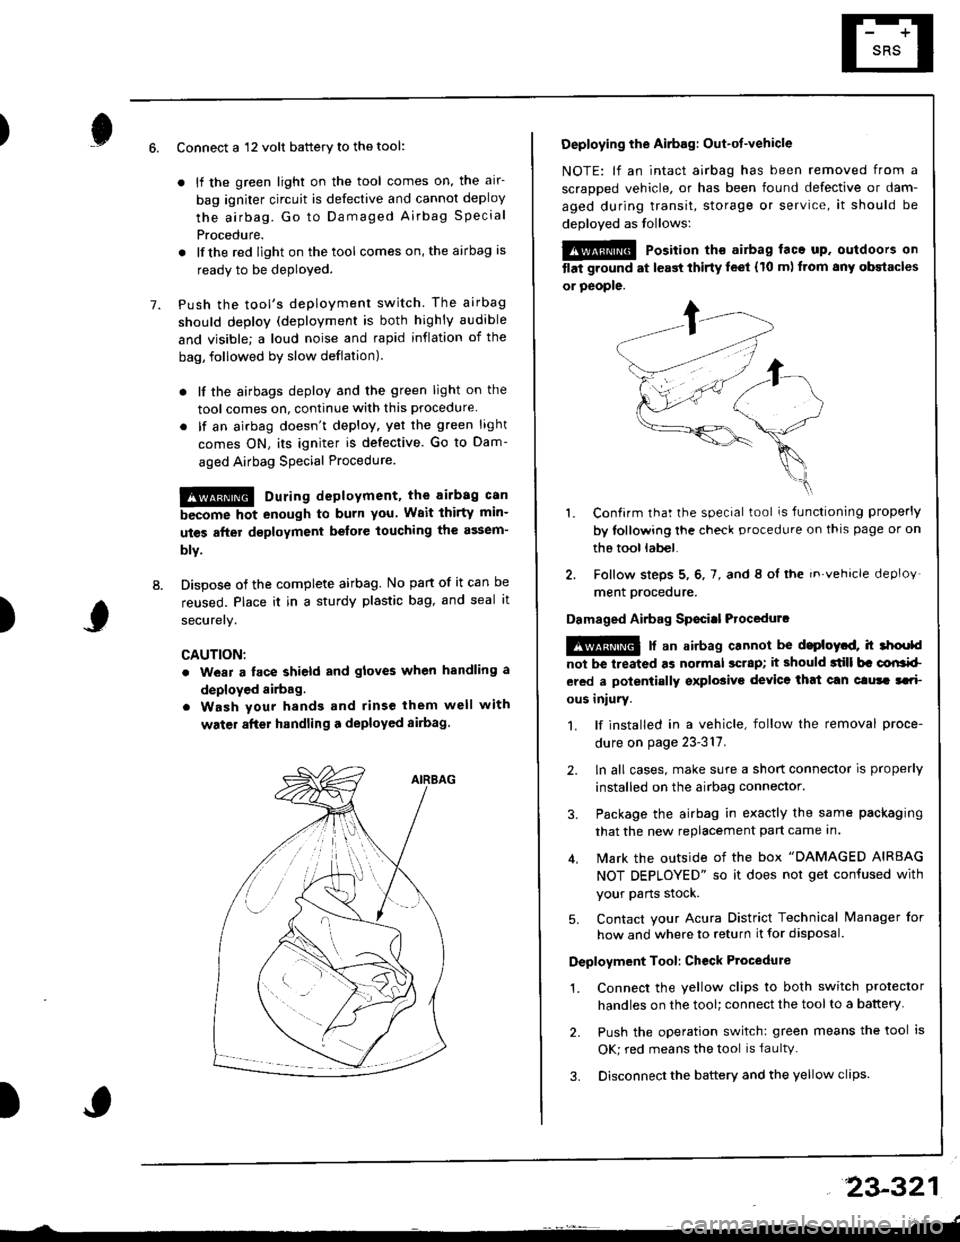 HONDA INTEGRA 1998 4.G Workshop Manual )6.
7.
8.
Connect a 12 volt battery to the tool:
. lf the green light on the tool comes on, the alr-
bag igniter circuit is defective and cannot deploy
the airbag. Go to Damaged Airbag Specia I
Proced